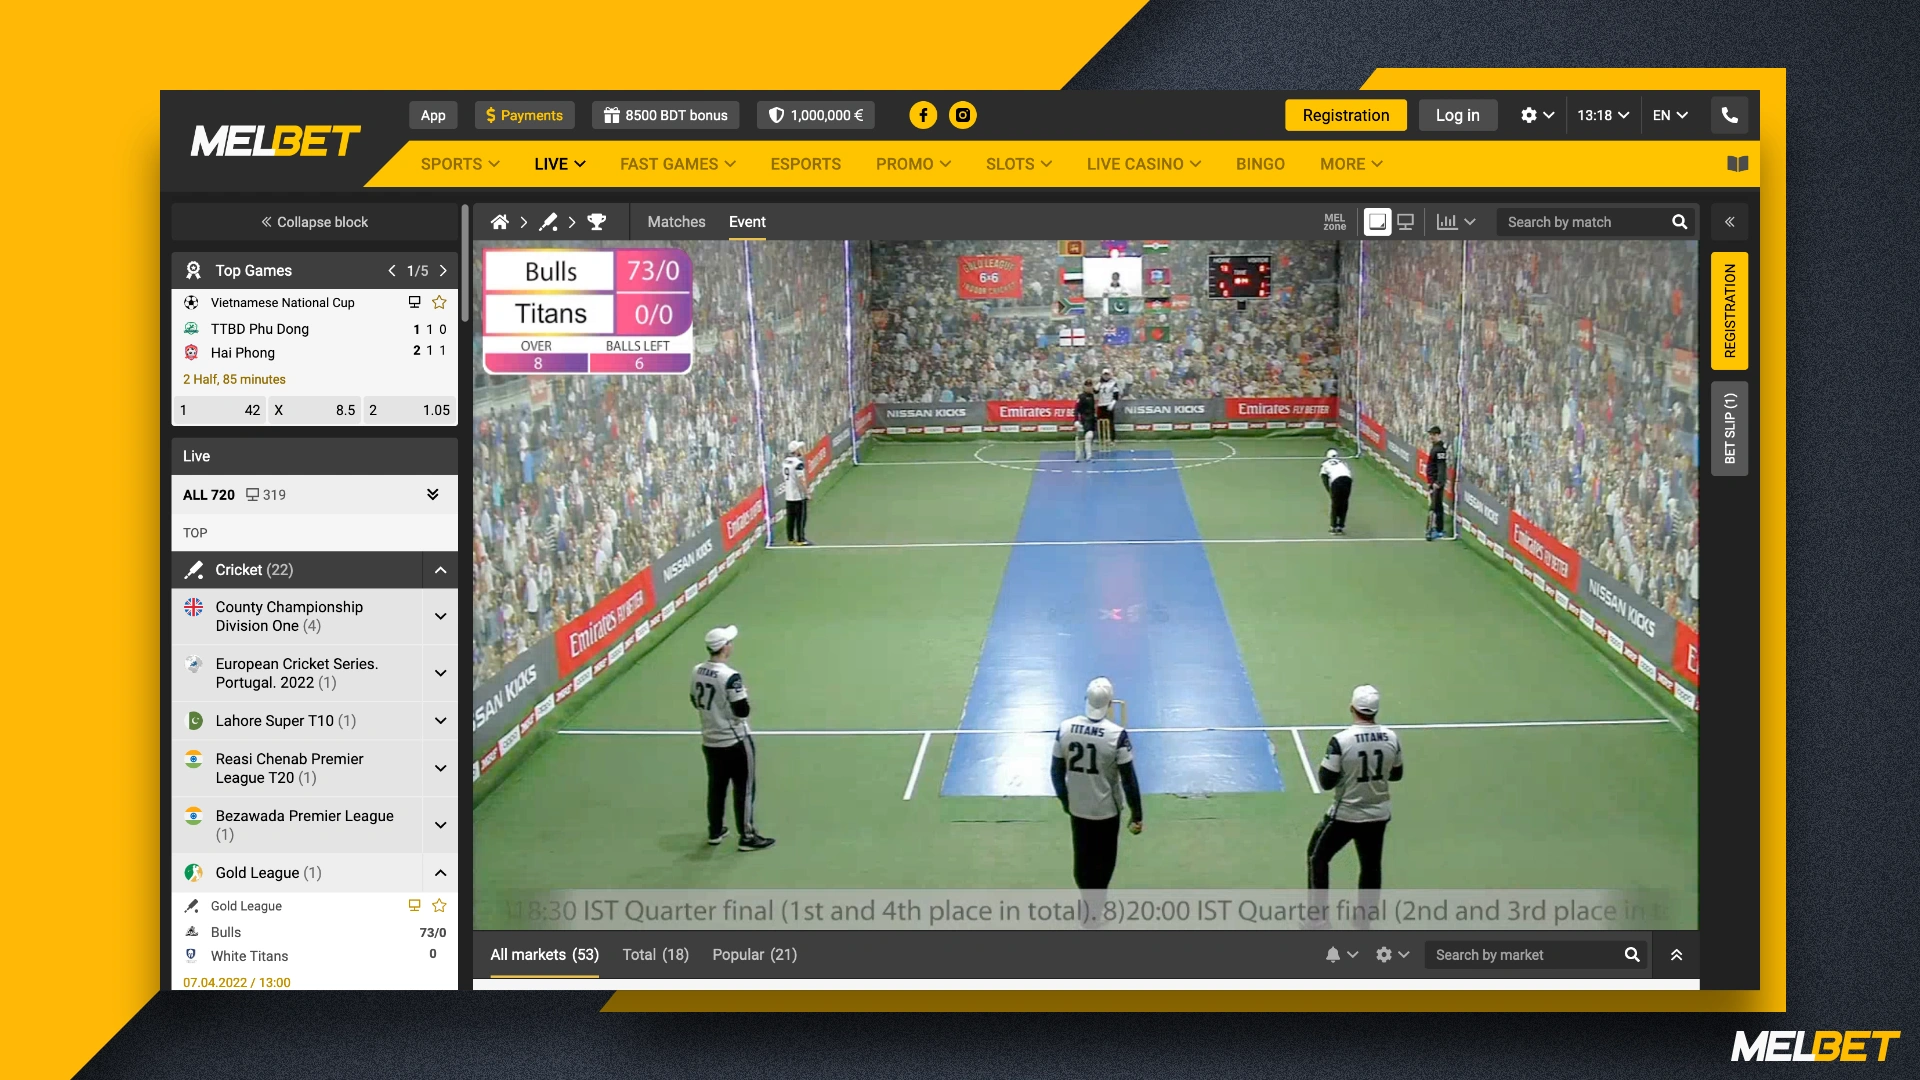 Melbet players can not only bet in real time, but also watch online broadcasts of matches